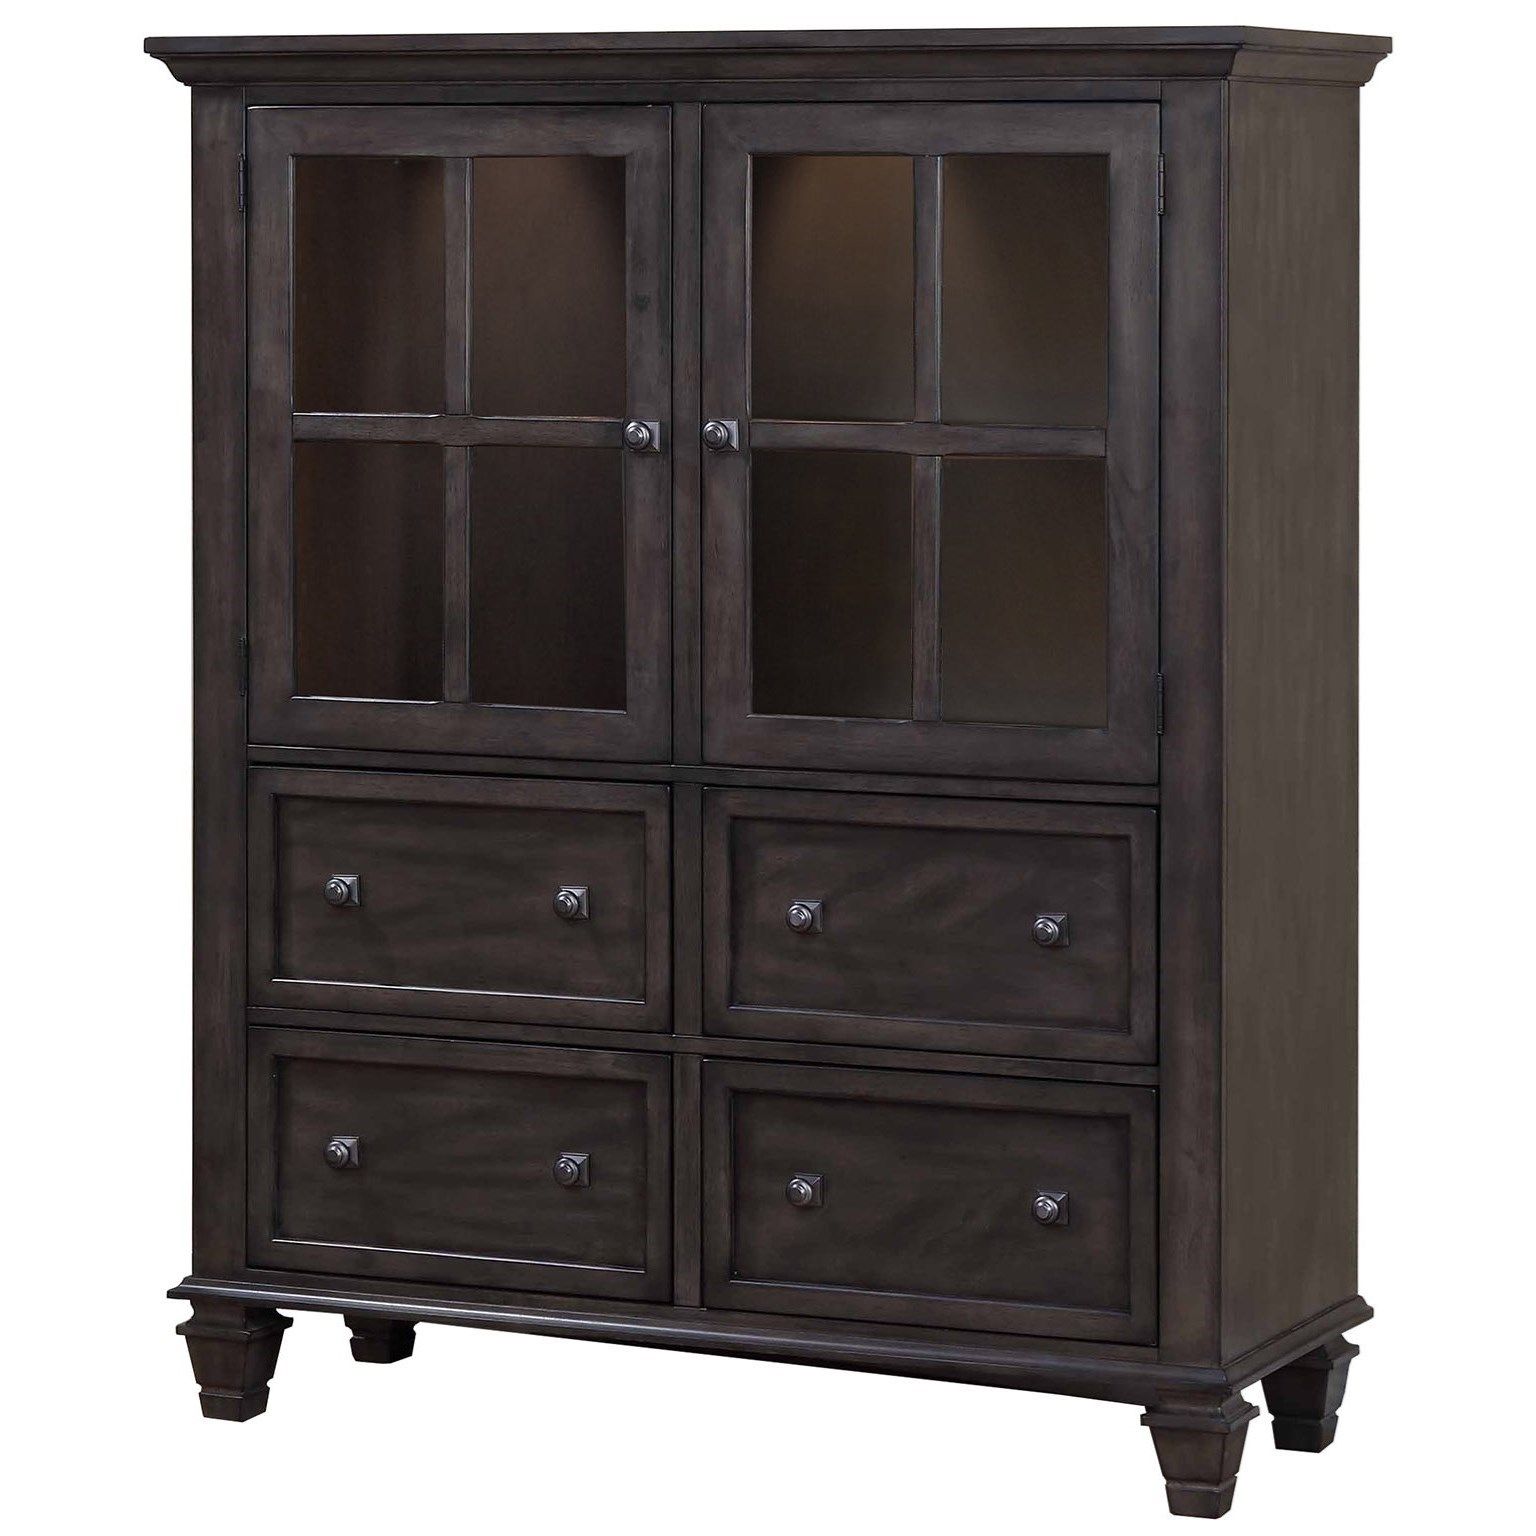 Hartford 52" Cabinet With Touch Light And Hanging Stemware Storage Winners Only At Dunk & Bright Furniture With Regard To Wooden Buffets With Two Side Door Storage Cabinets And Stemware Rack (View 22 of 30)